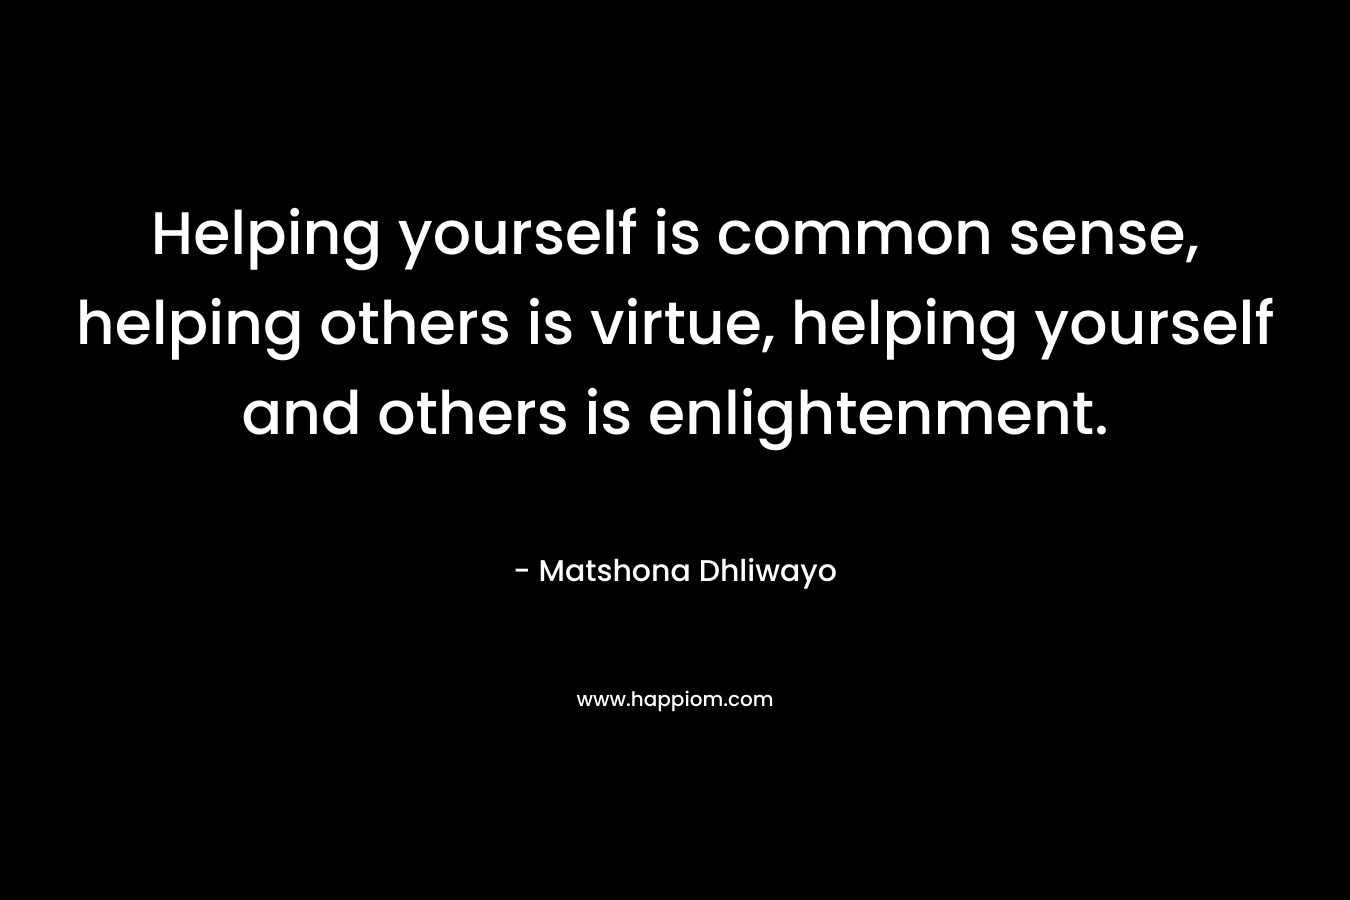 Helping yourself is common sense, helping others is virtue, helping yourself and others is enlightenment.